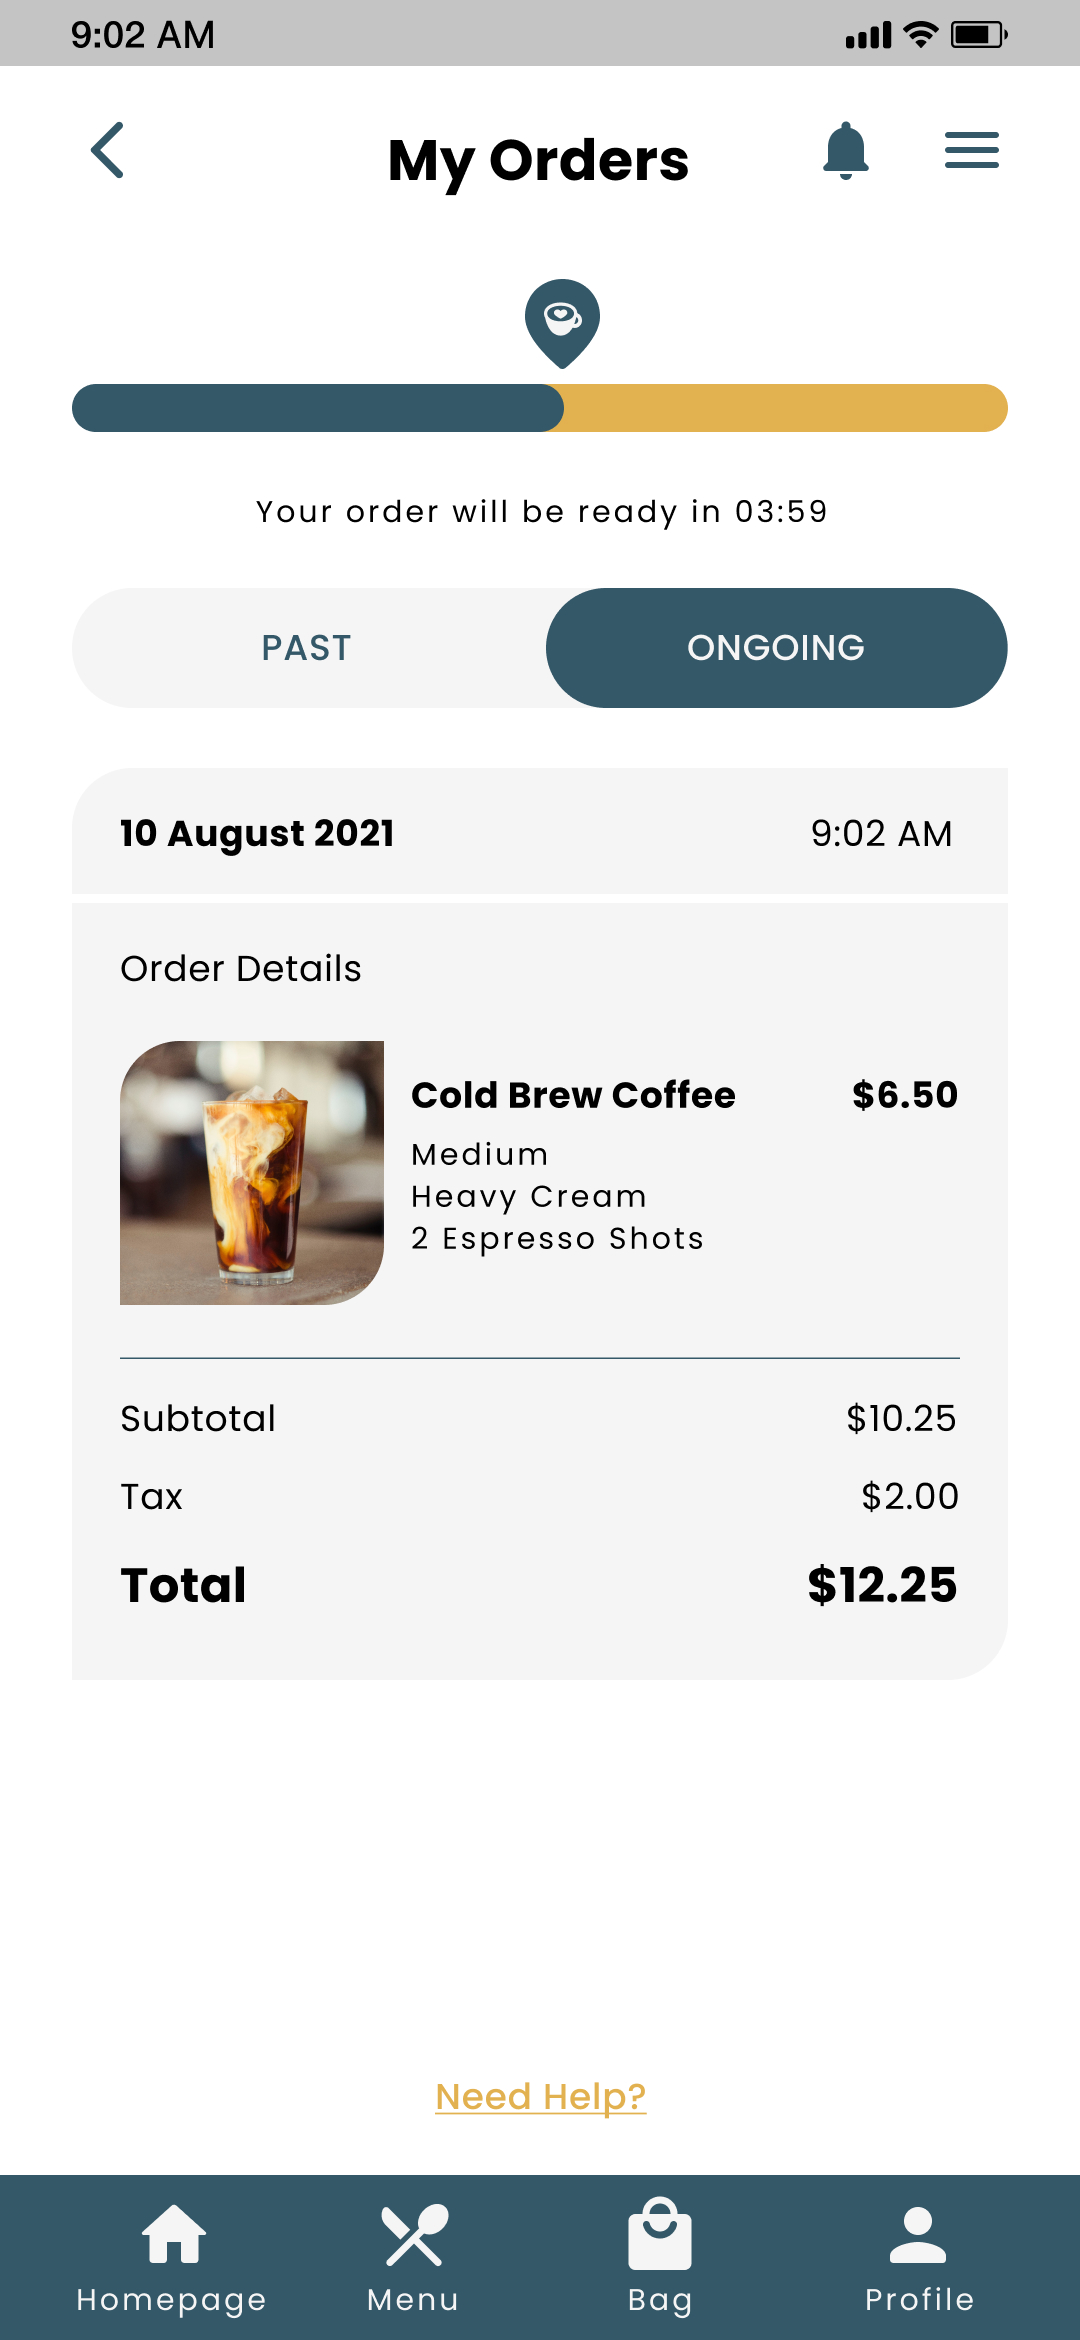 COCO My Orders with "Ongoing" selected screen for mobile app